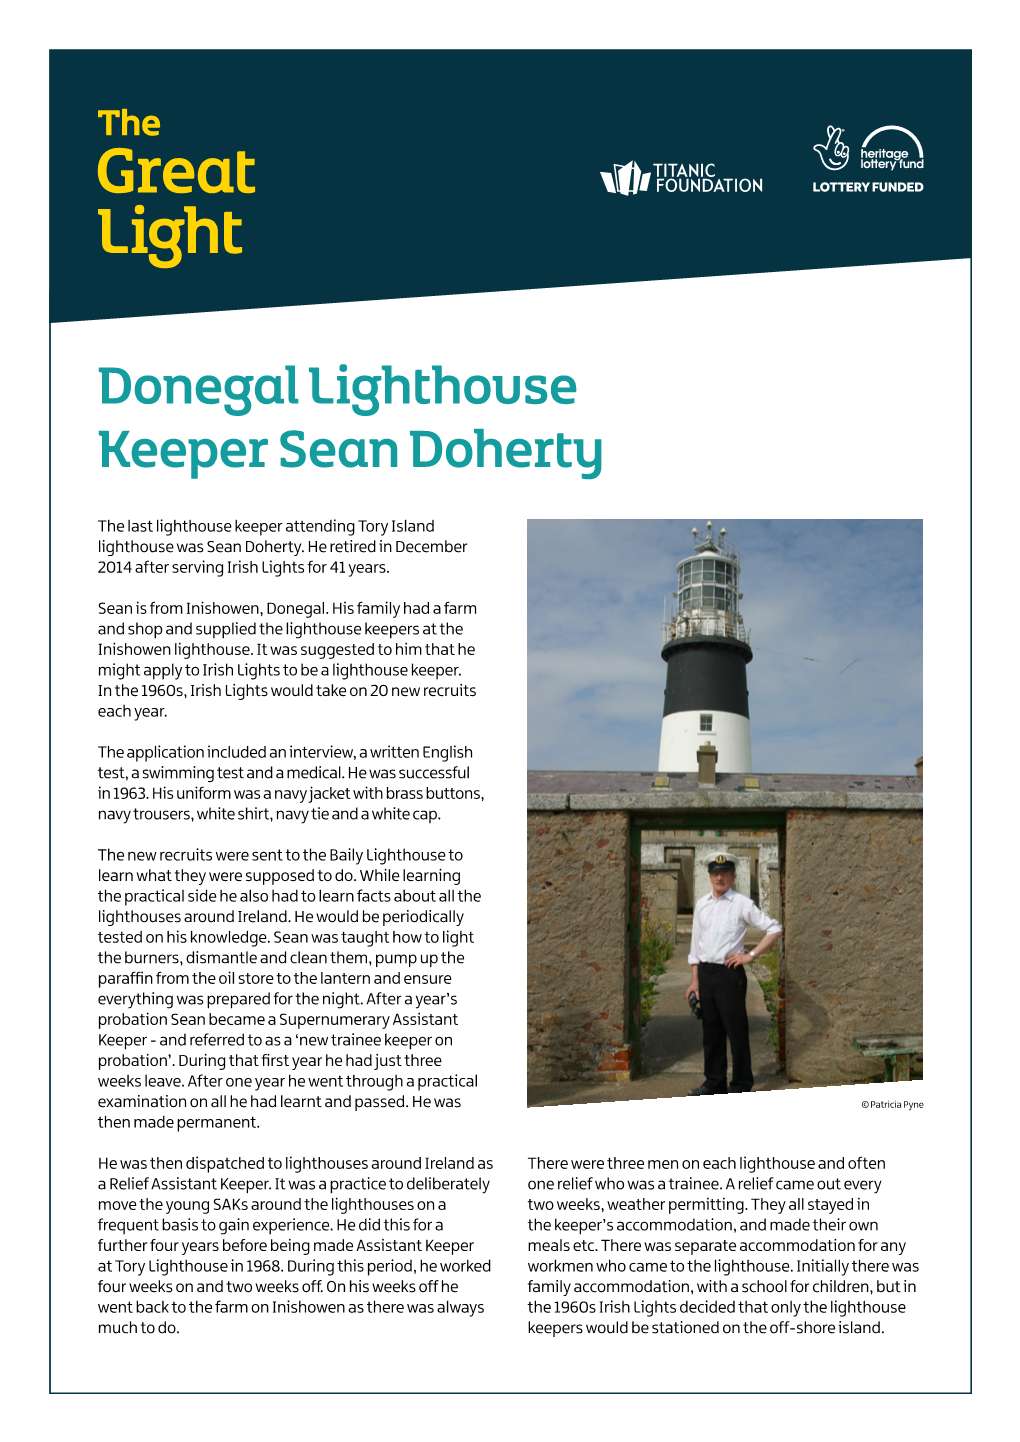 Donegal Lighthouse Keeper Sean Doherty